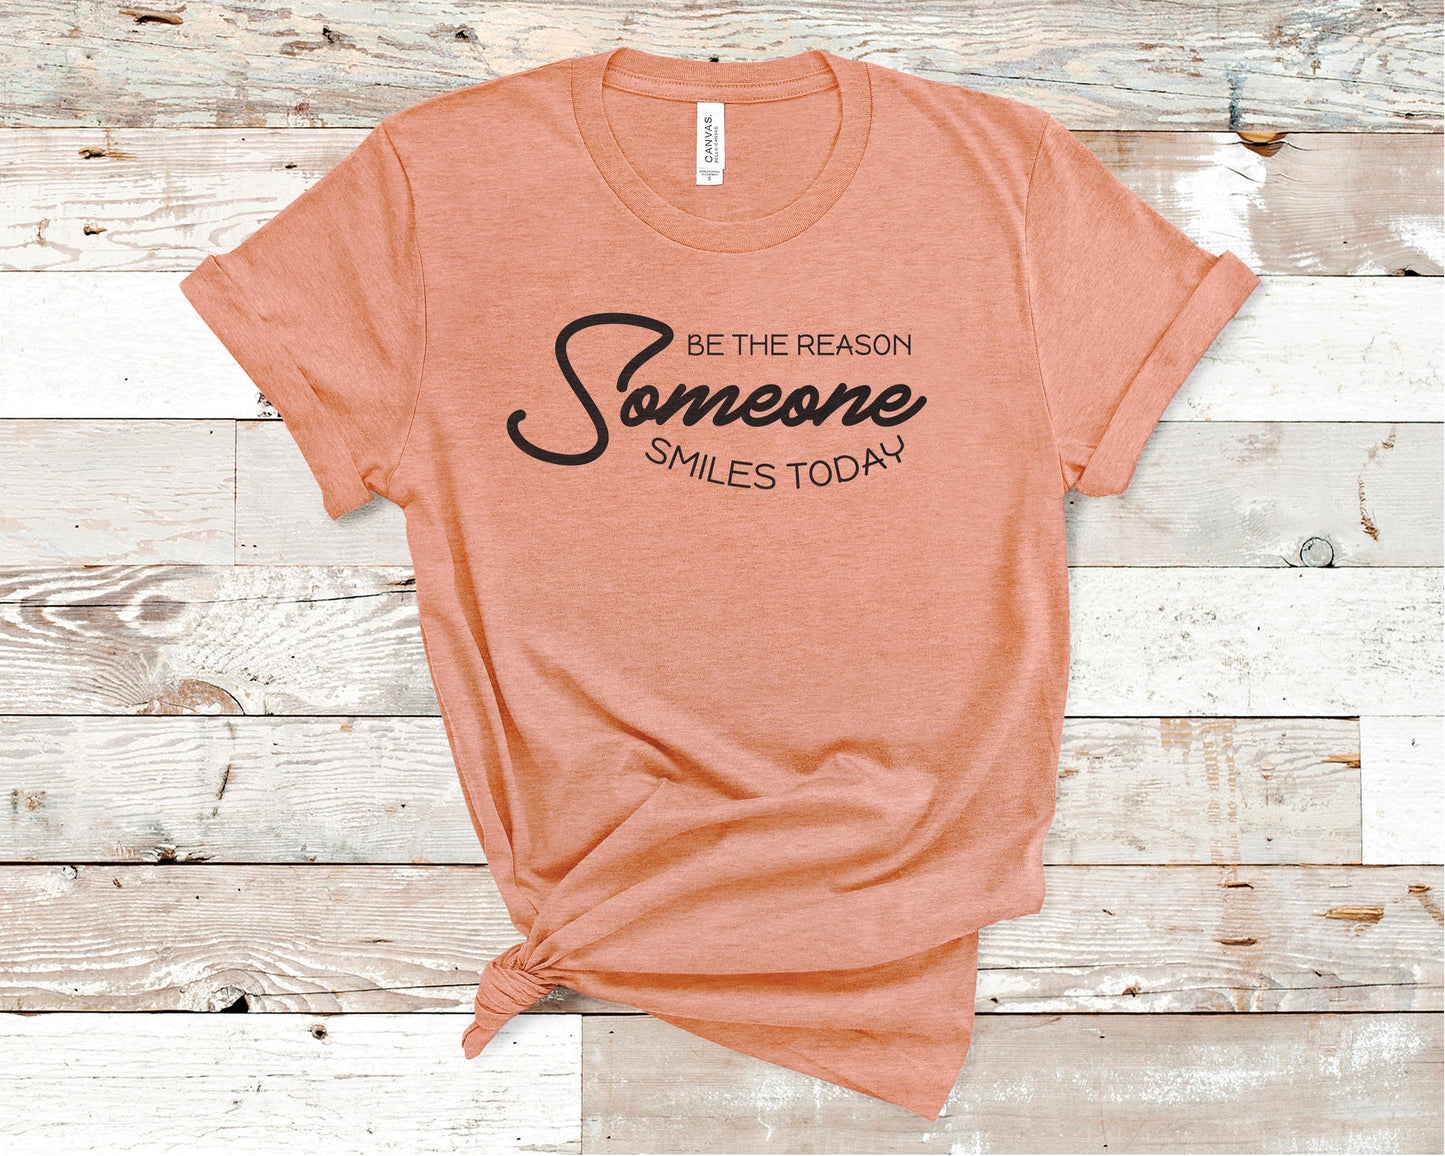 Be the Reason Someone Smiles Today - Inspiration